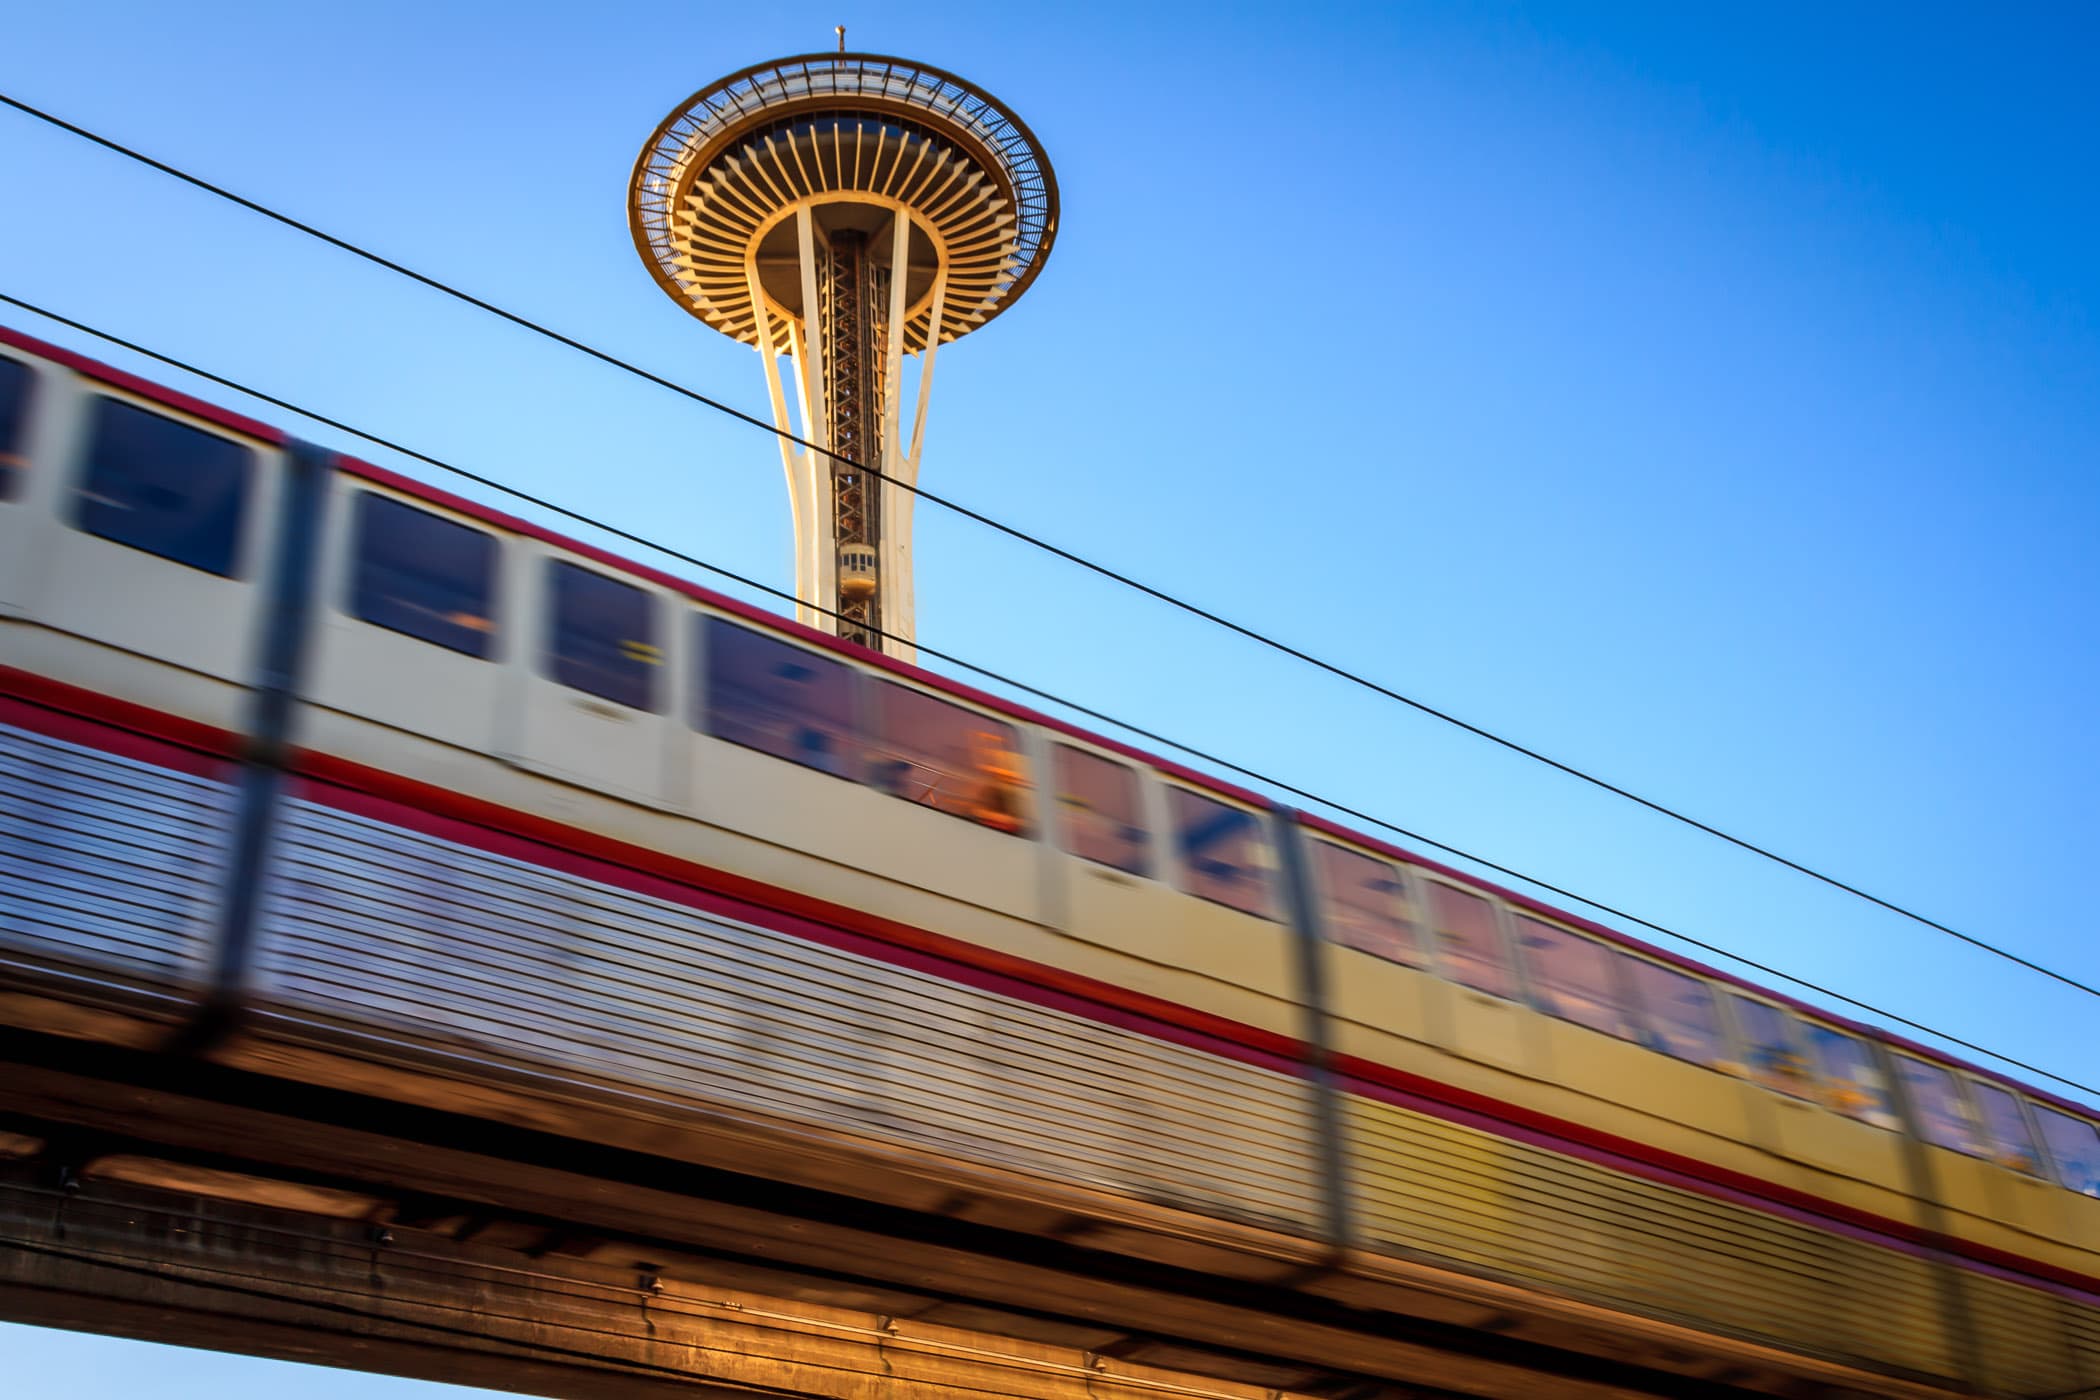 The Seattle Monorail speeds past the Space Needle on its route from the Seattle Center to the Westlake Center.